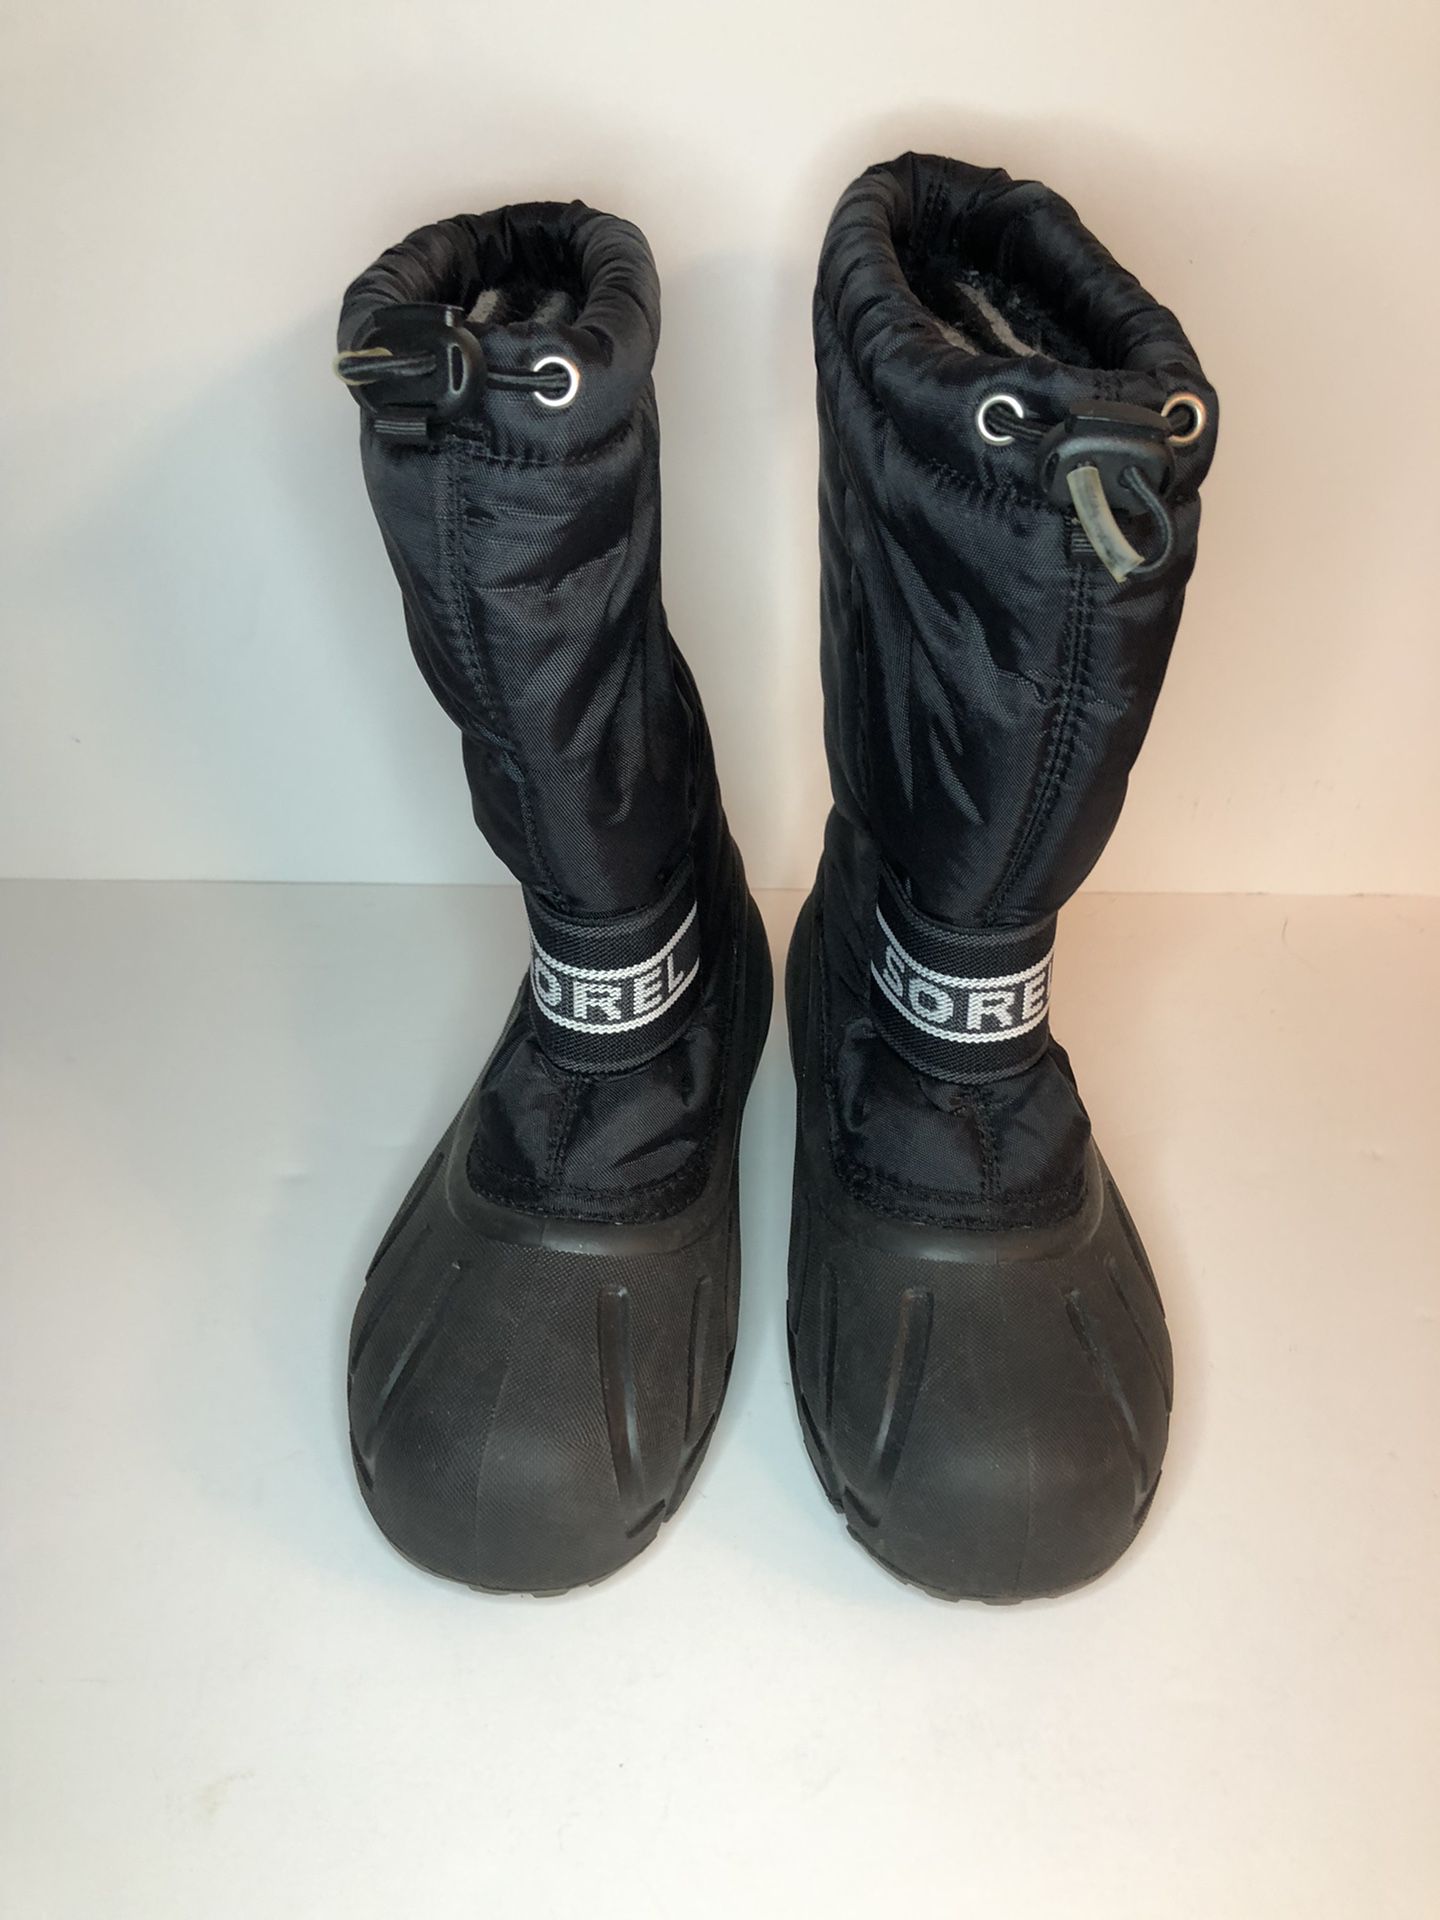 Sorel Youth Black Snow Chariot Insulated Winter Boots Size 3